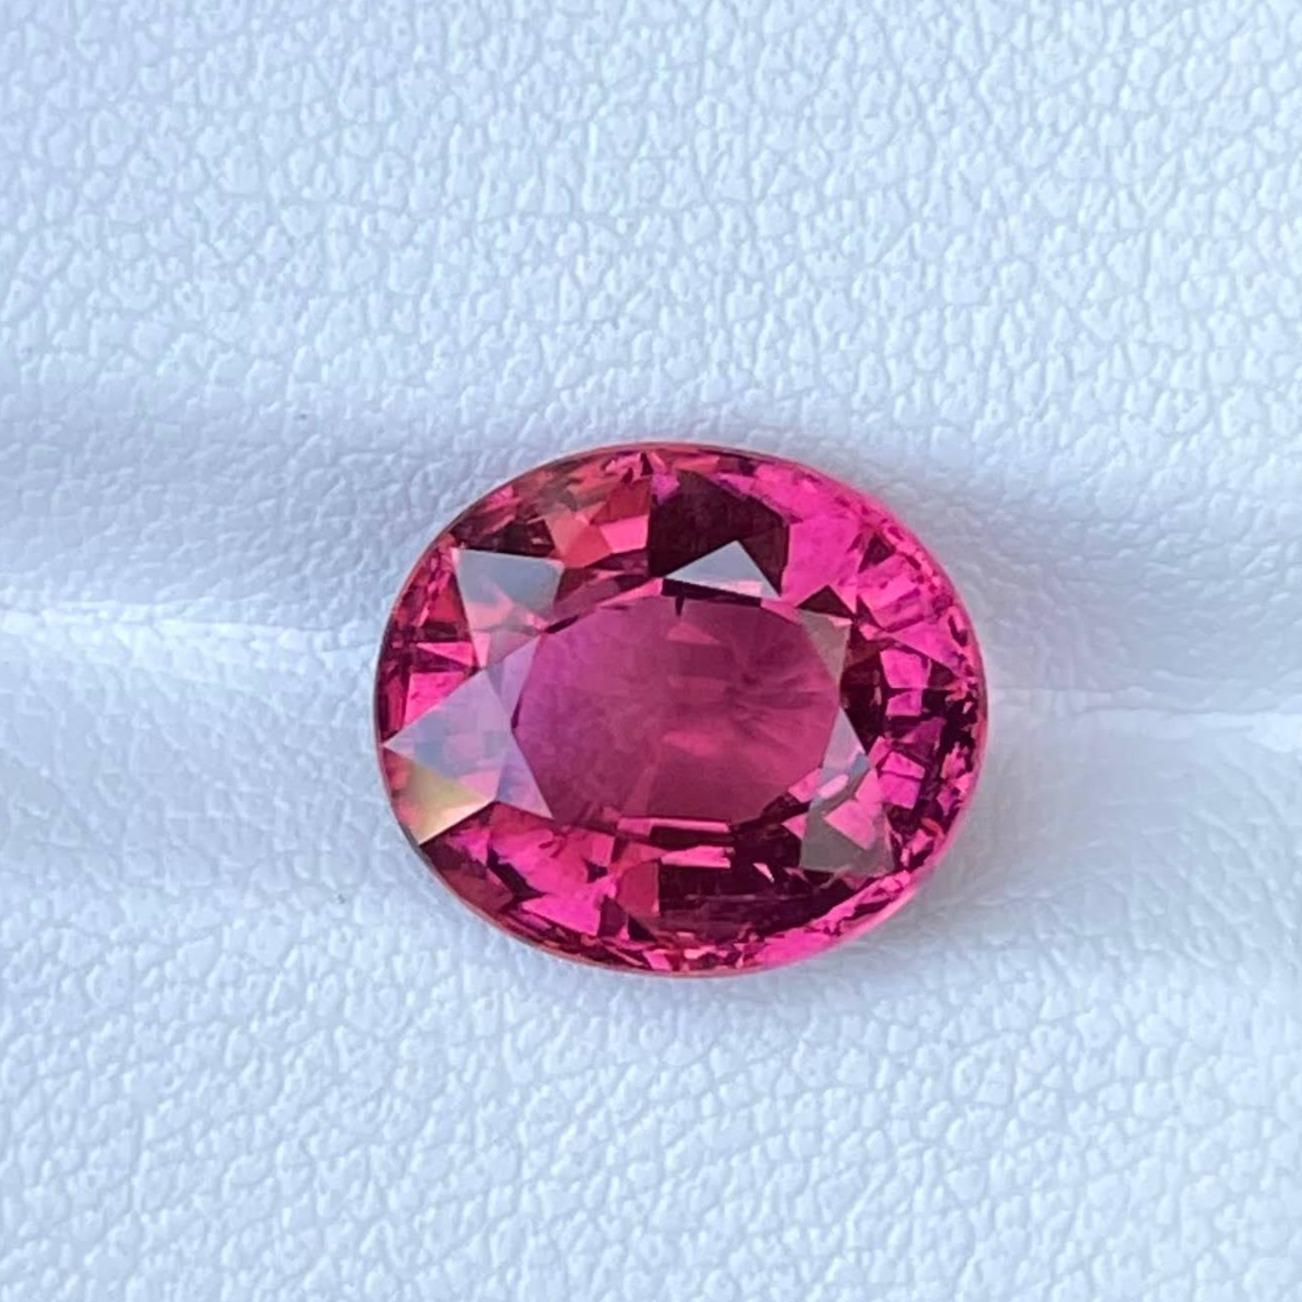 Women's or Men's Hot Pink Tourmaline Stone 4.80 carats Oval Cut Natural Gemstone from Nigeria For Sale